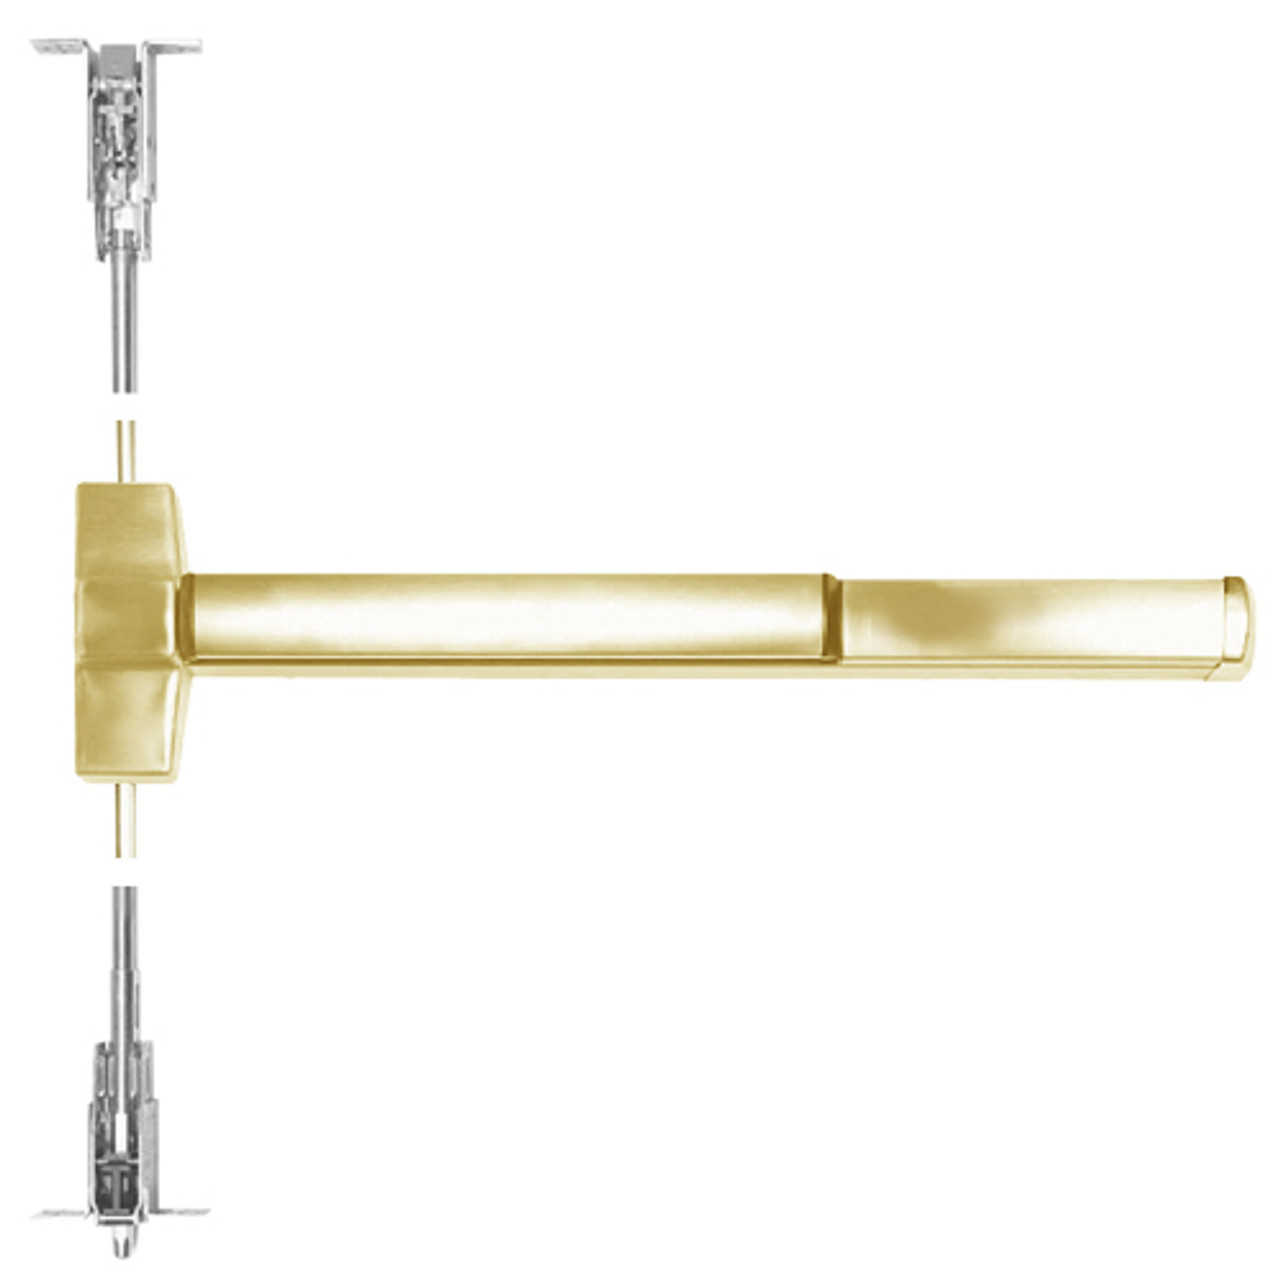 ED5800A-606-M61 Corbin ED5800 Series Fire Rated Concealed Vertical Rod Device with Exit Alarm Device in Satin Brass Finish